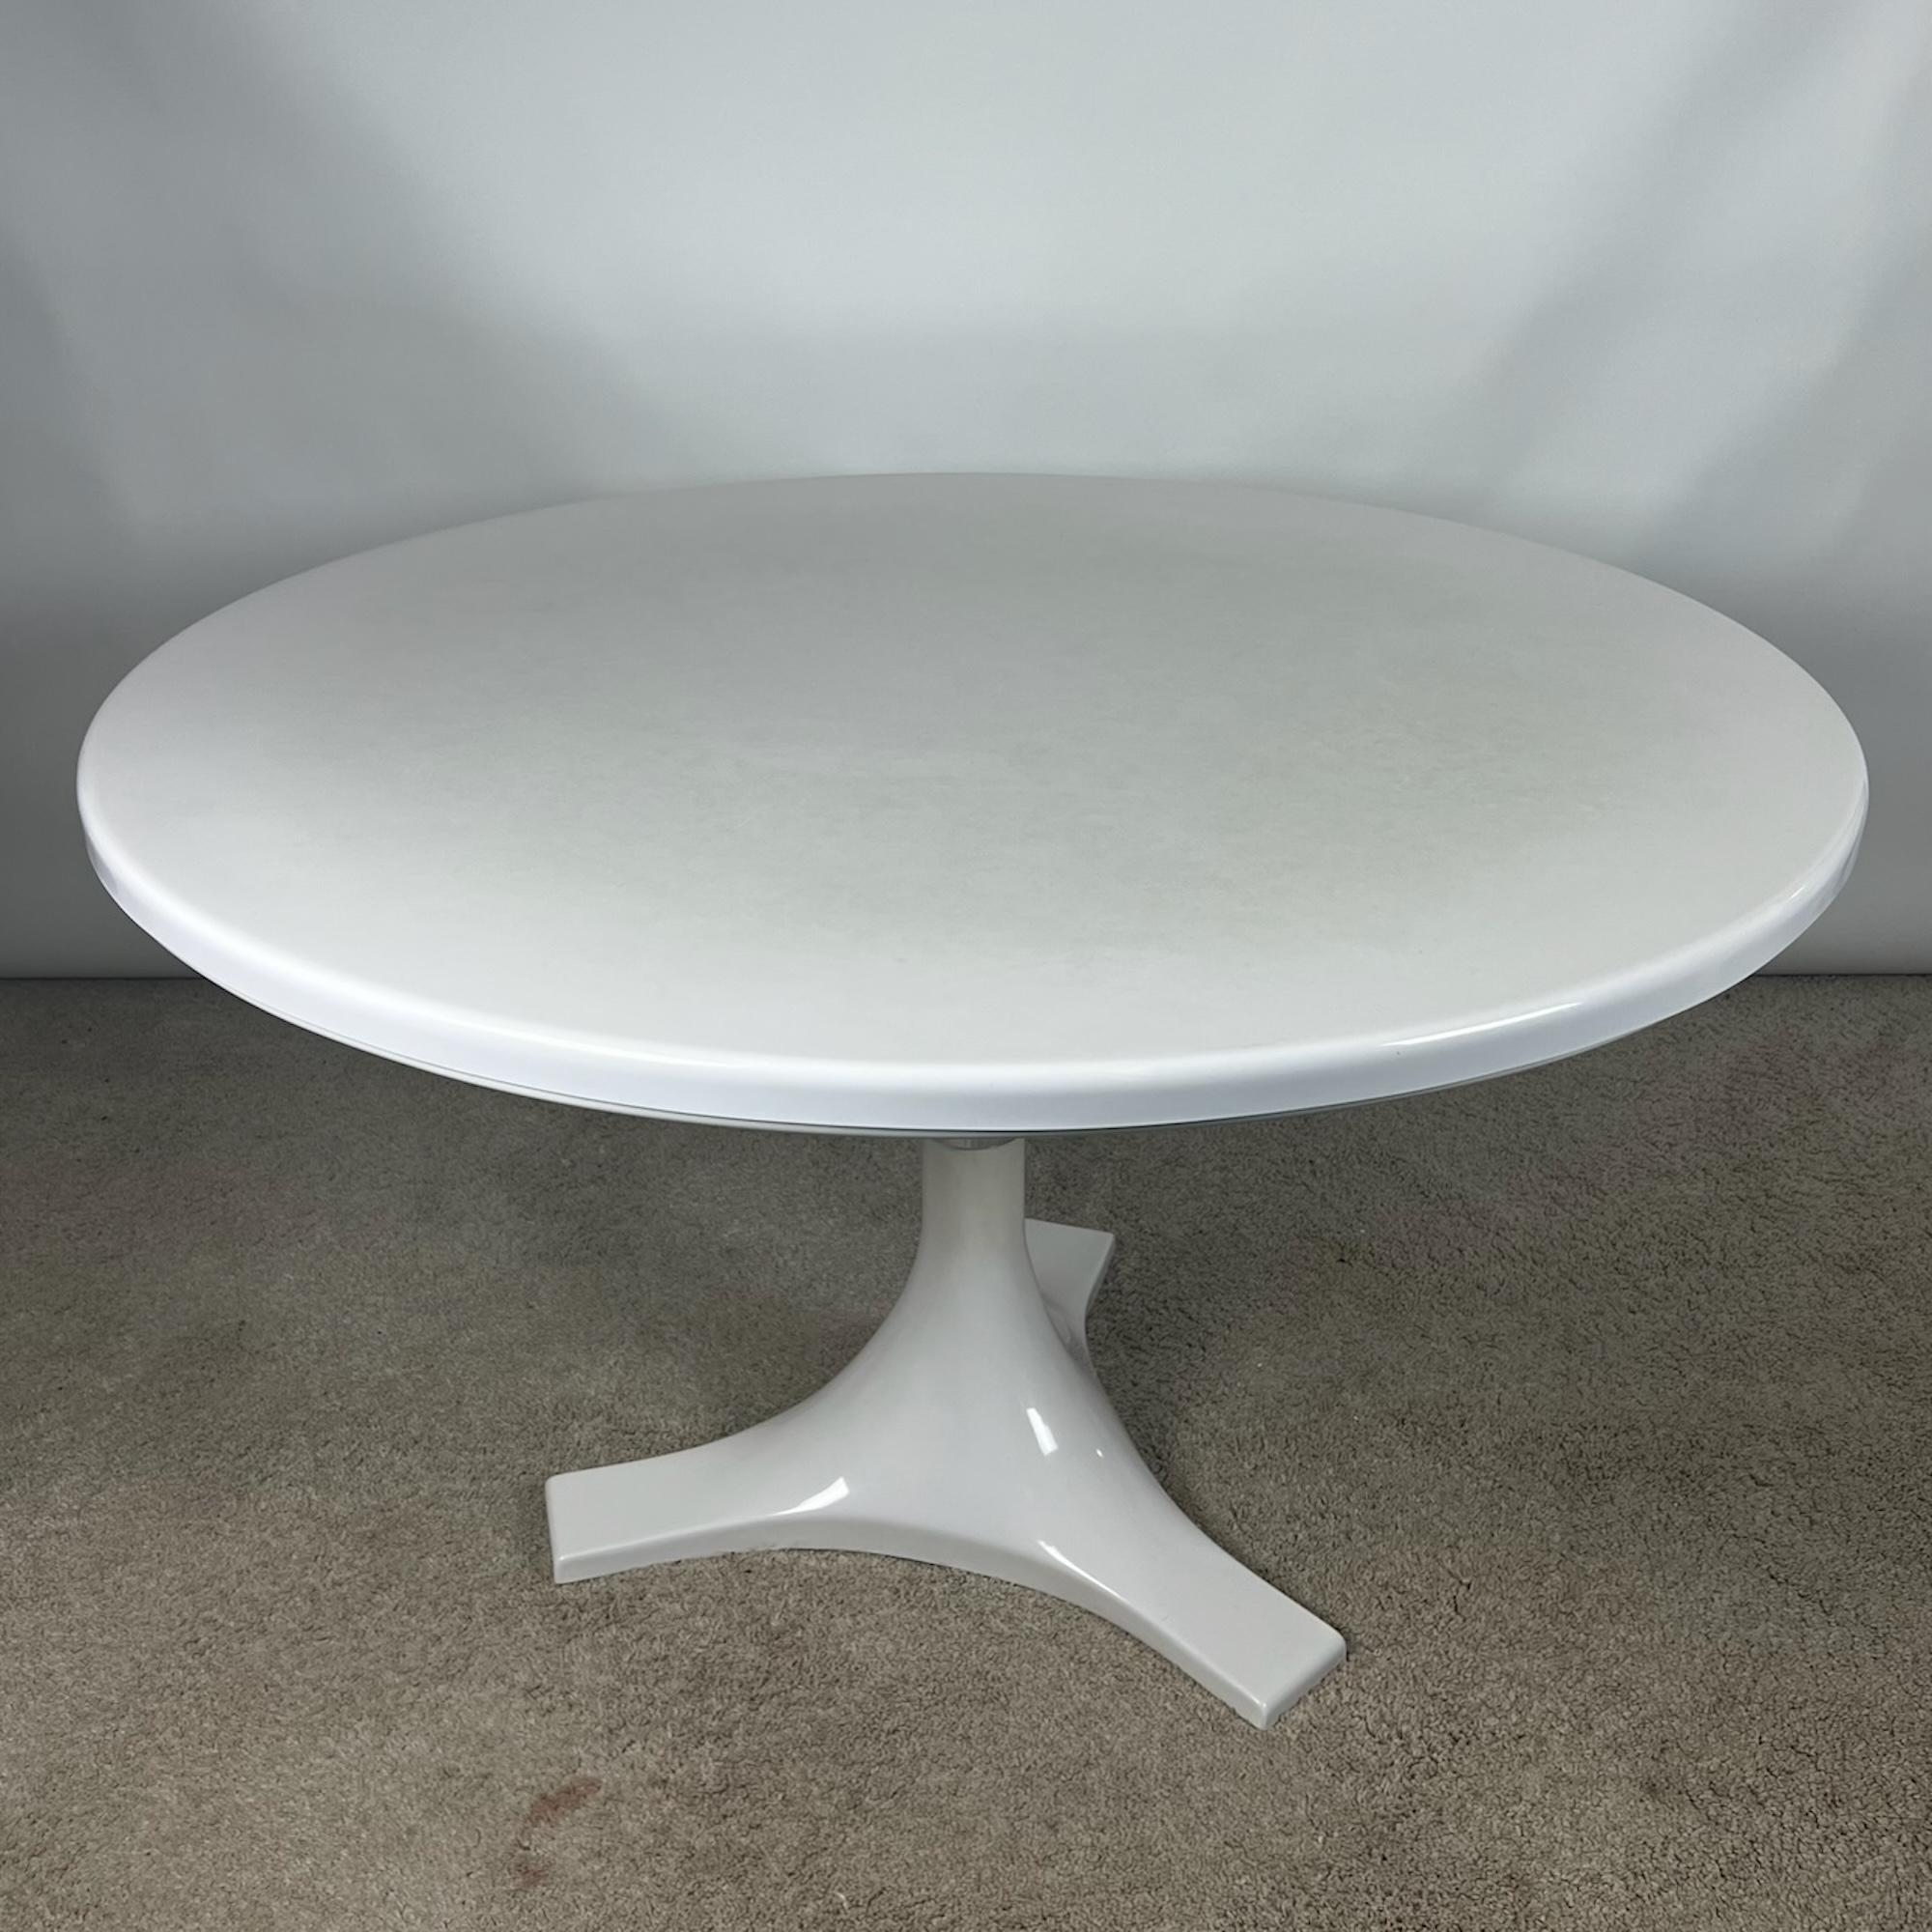 Beautiful and iconic round table designed by Ignazio Gardella and Anna Castelli Ferrieri for Kartell in the 60s.

This large table model 4997 is made of heavy white resin. The tabletop is screwed on a tripod base. A steel ring connects the two